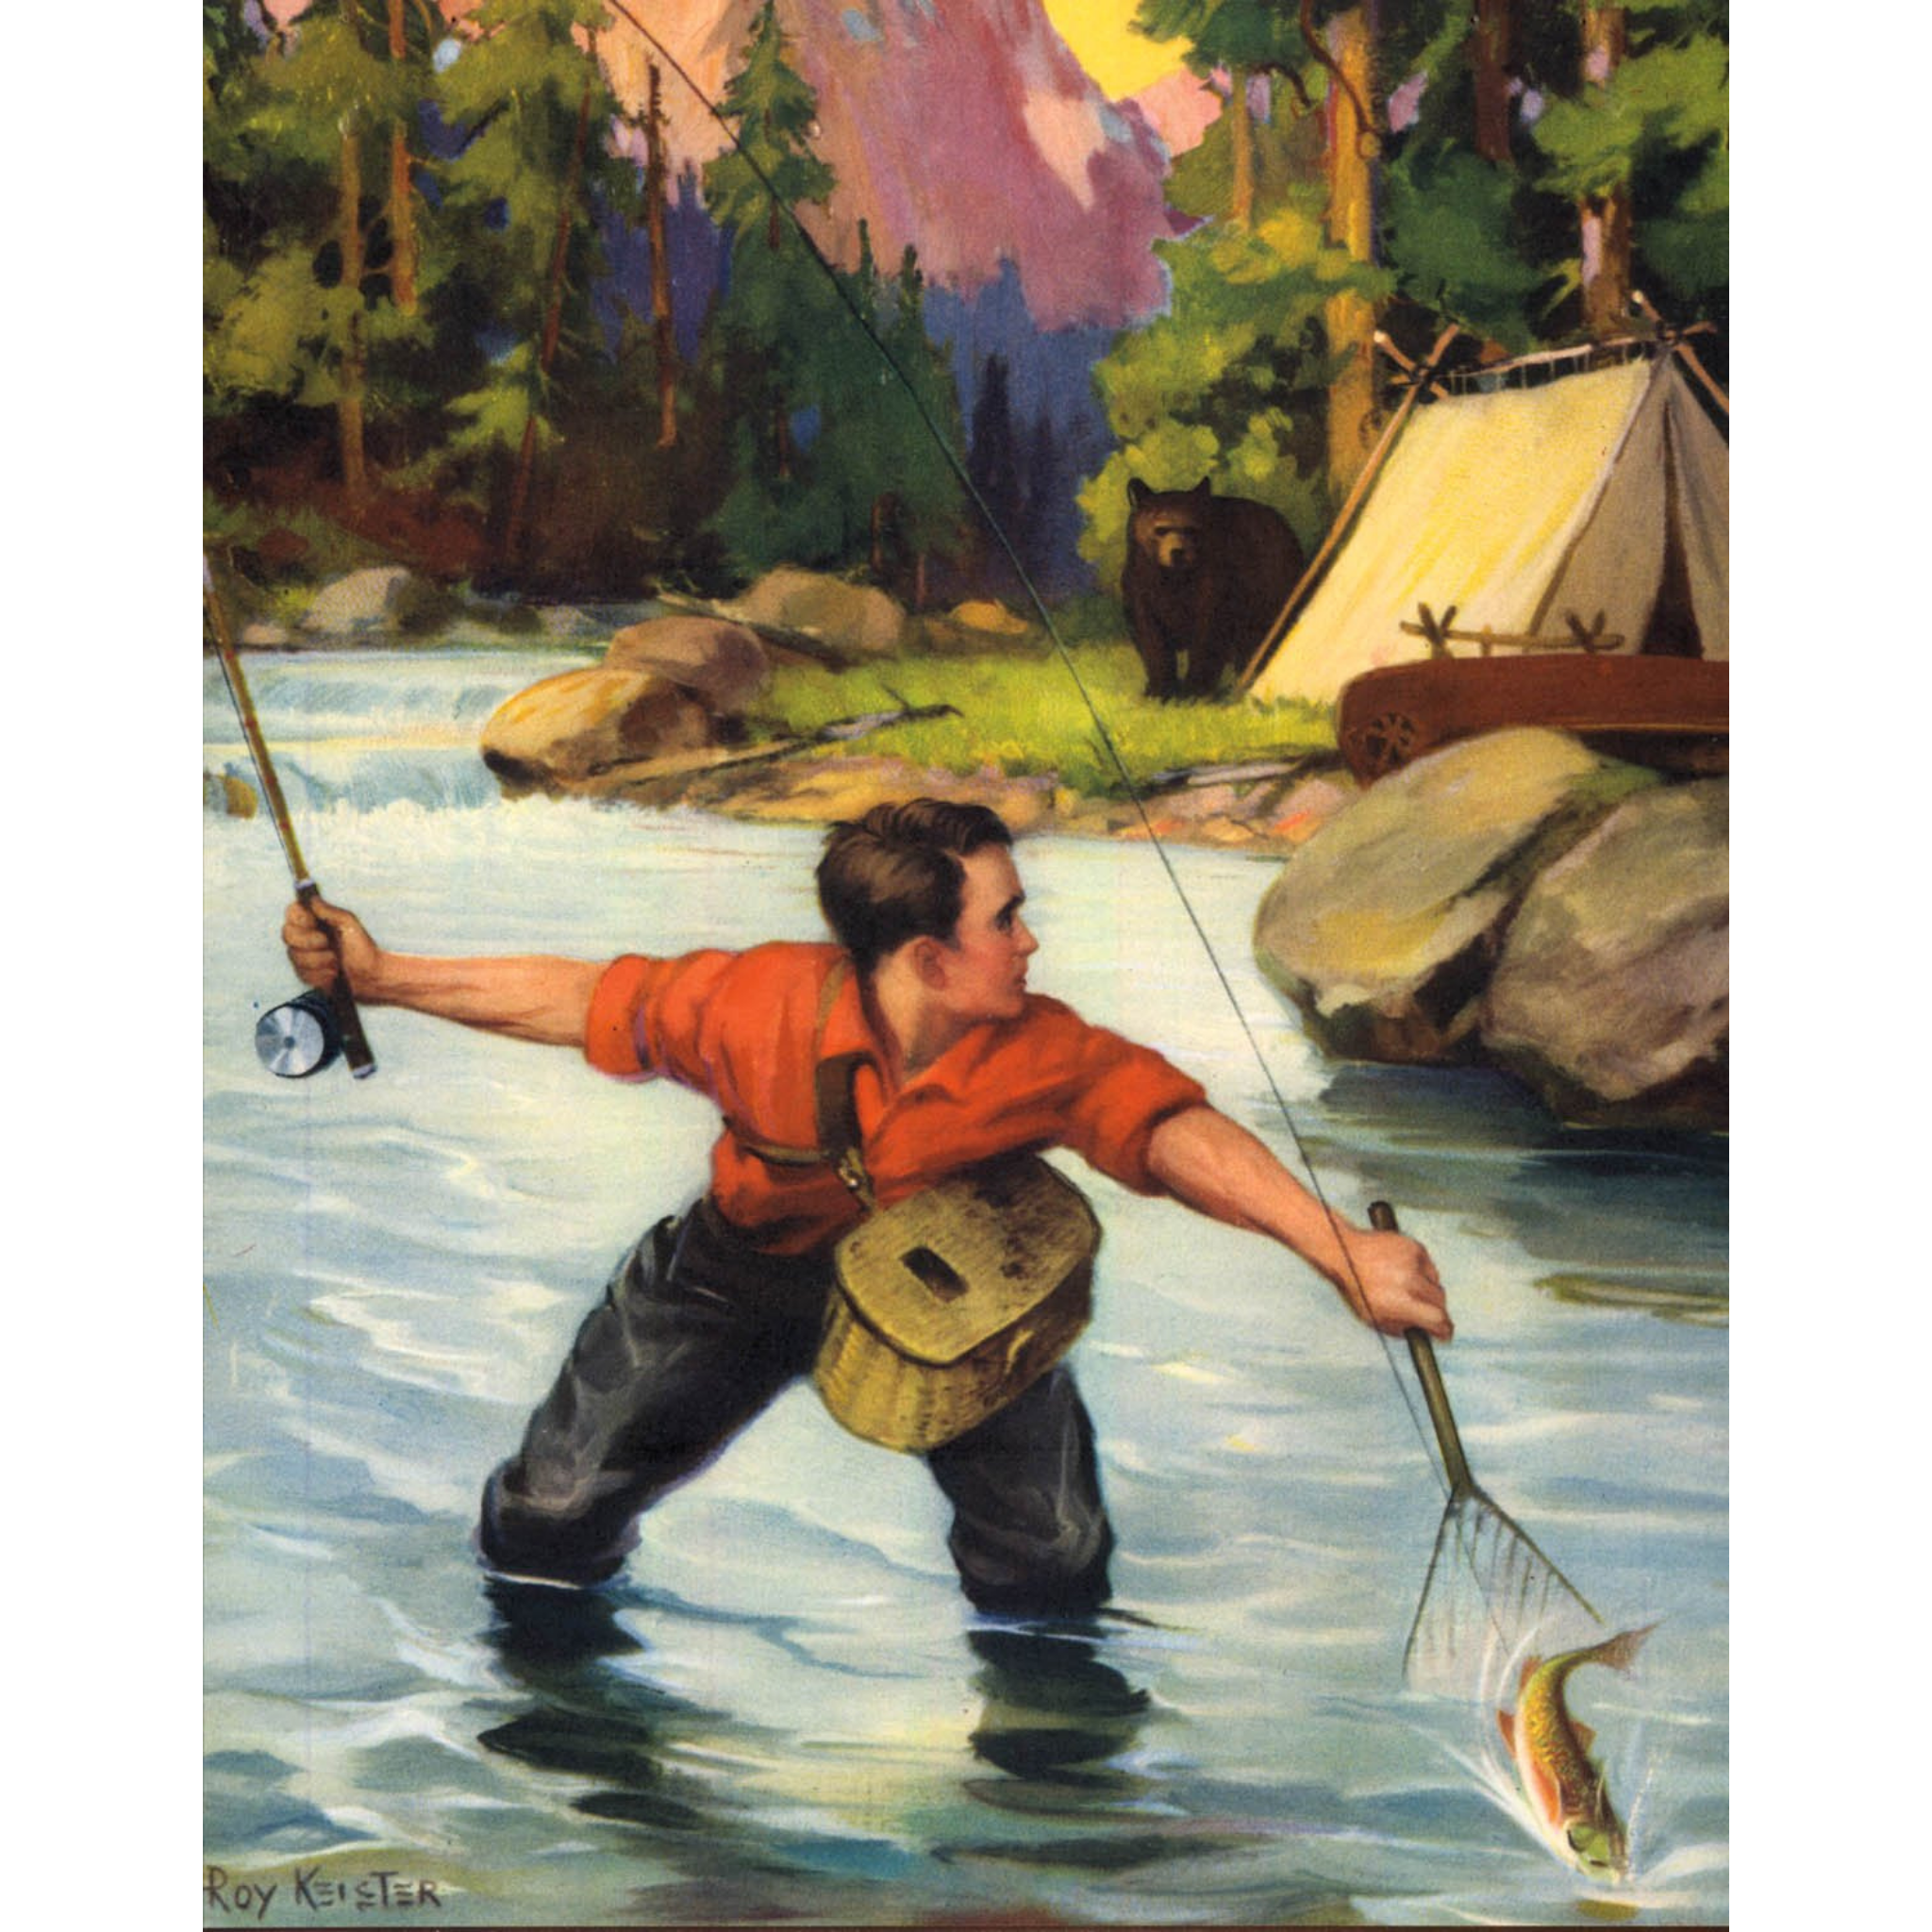 Man Fishing in Stream - Bear in Camp - ca. 1925 Roy Kester Lithograph